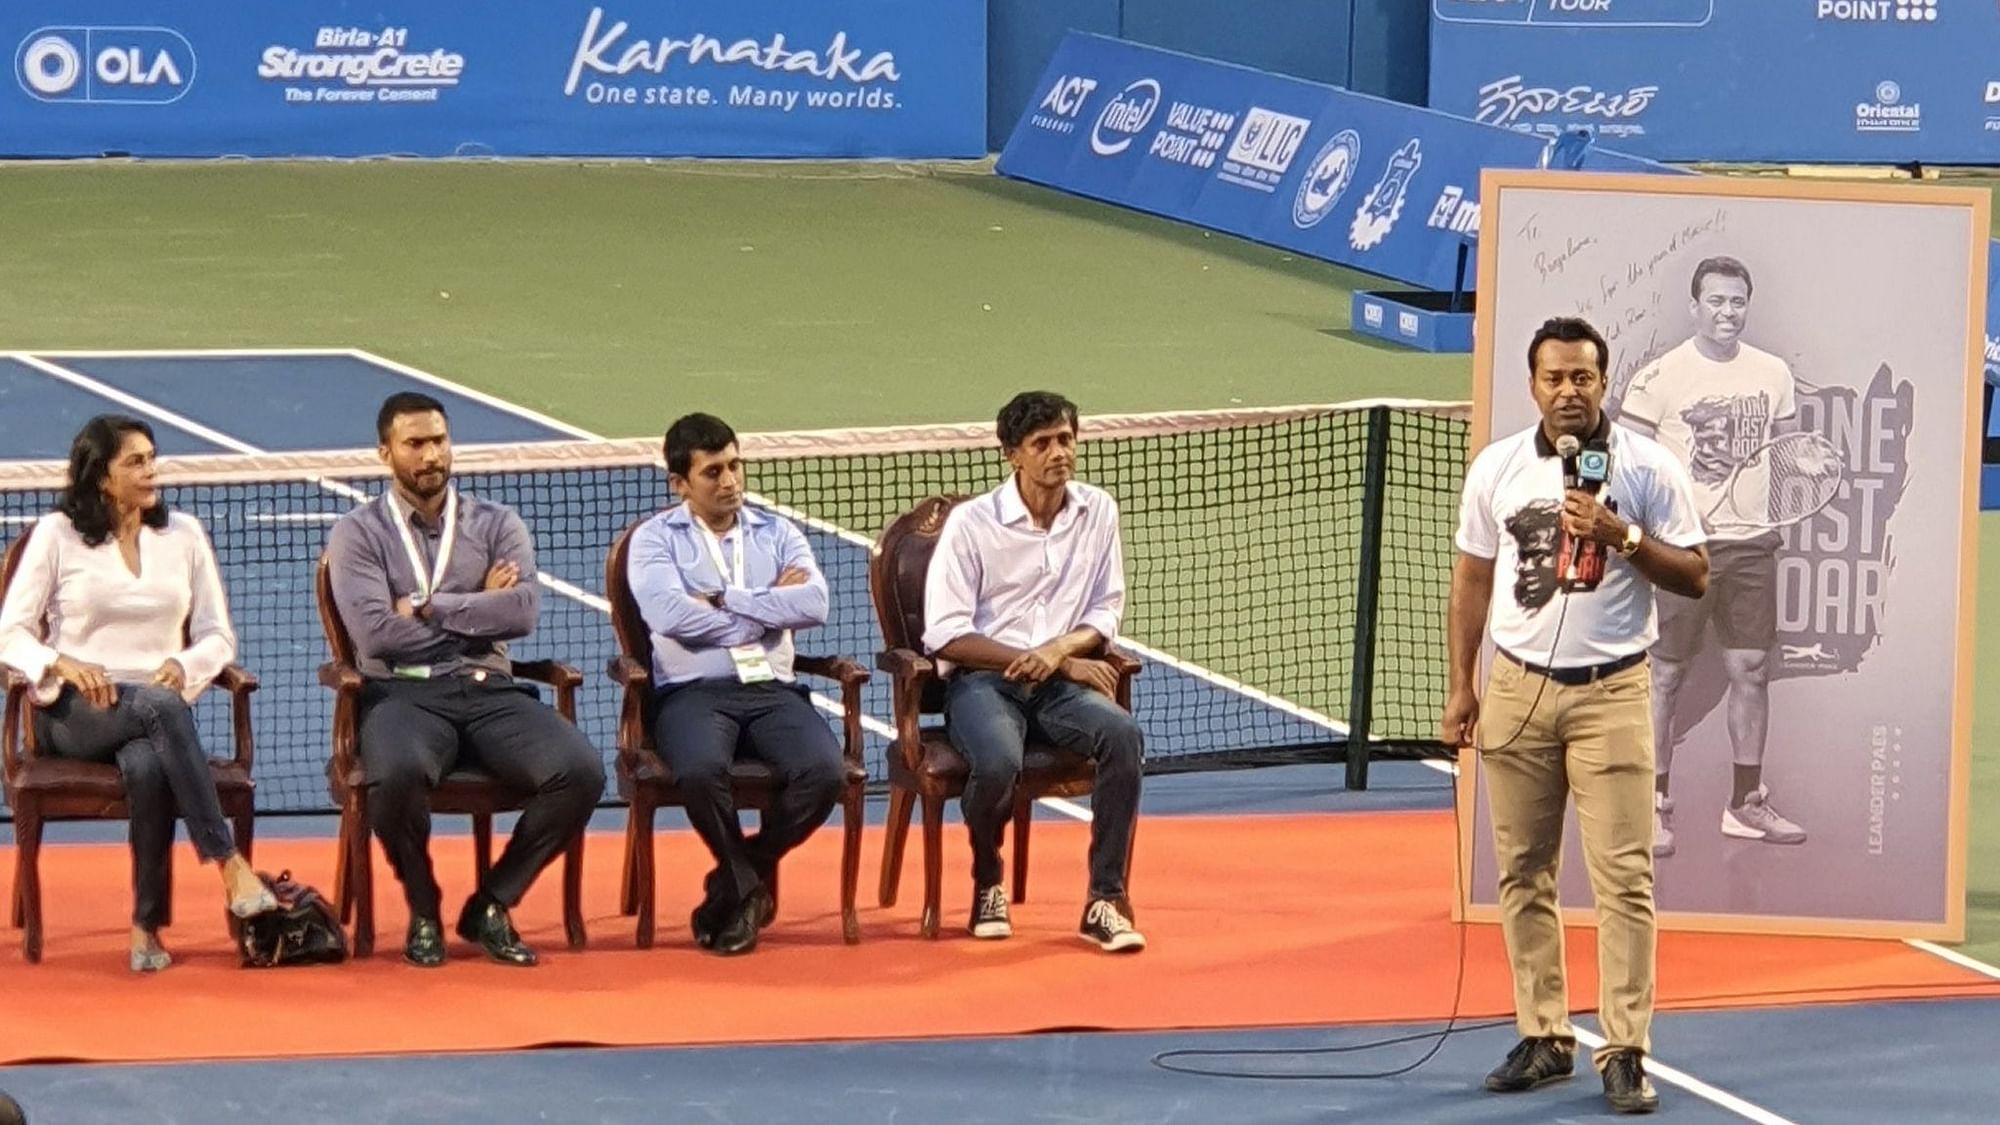 Indian tennis legend Leander Paes played his last ATP event on Indian soil on Saturday.